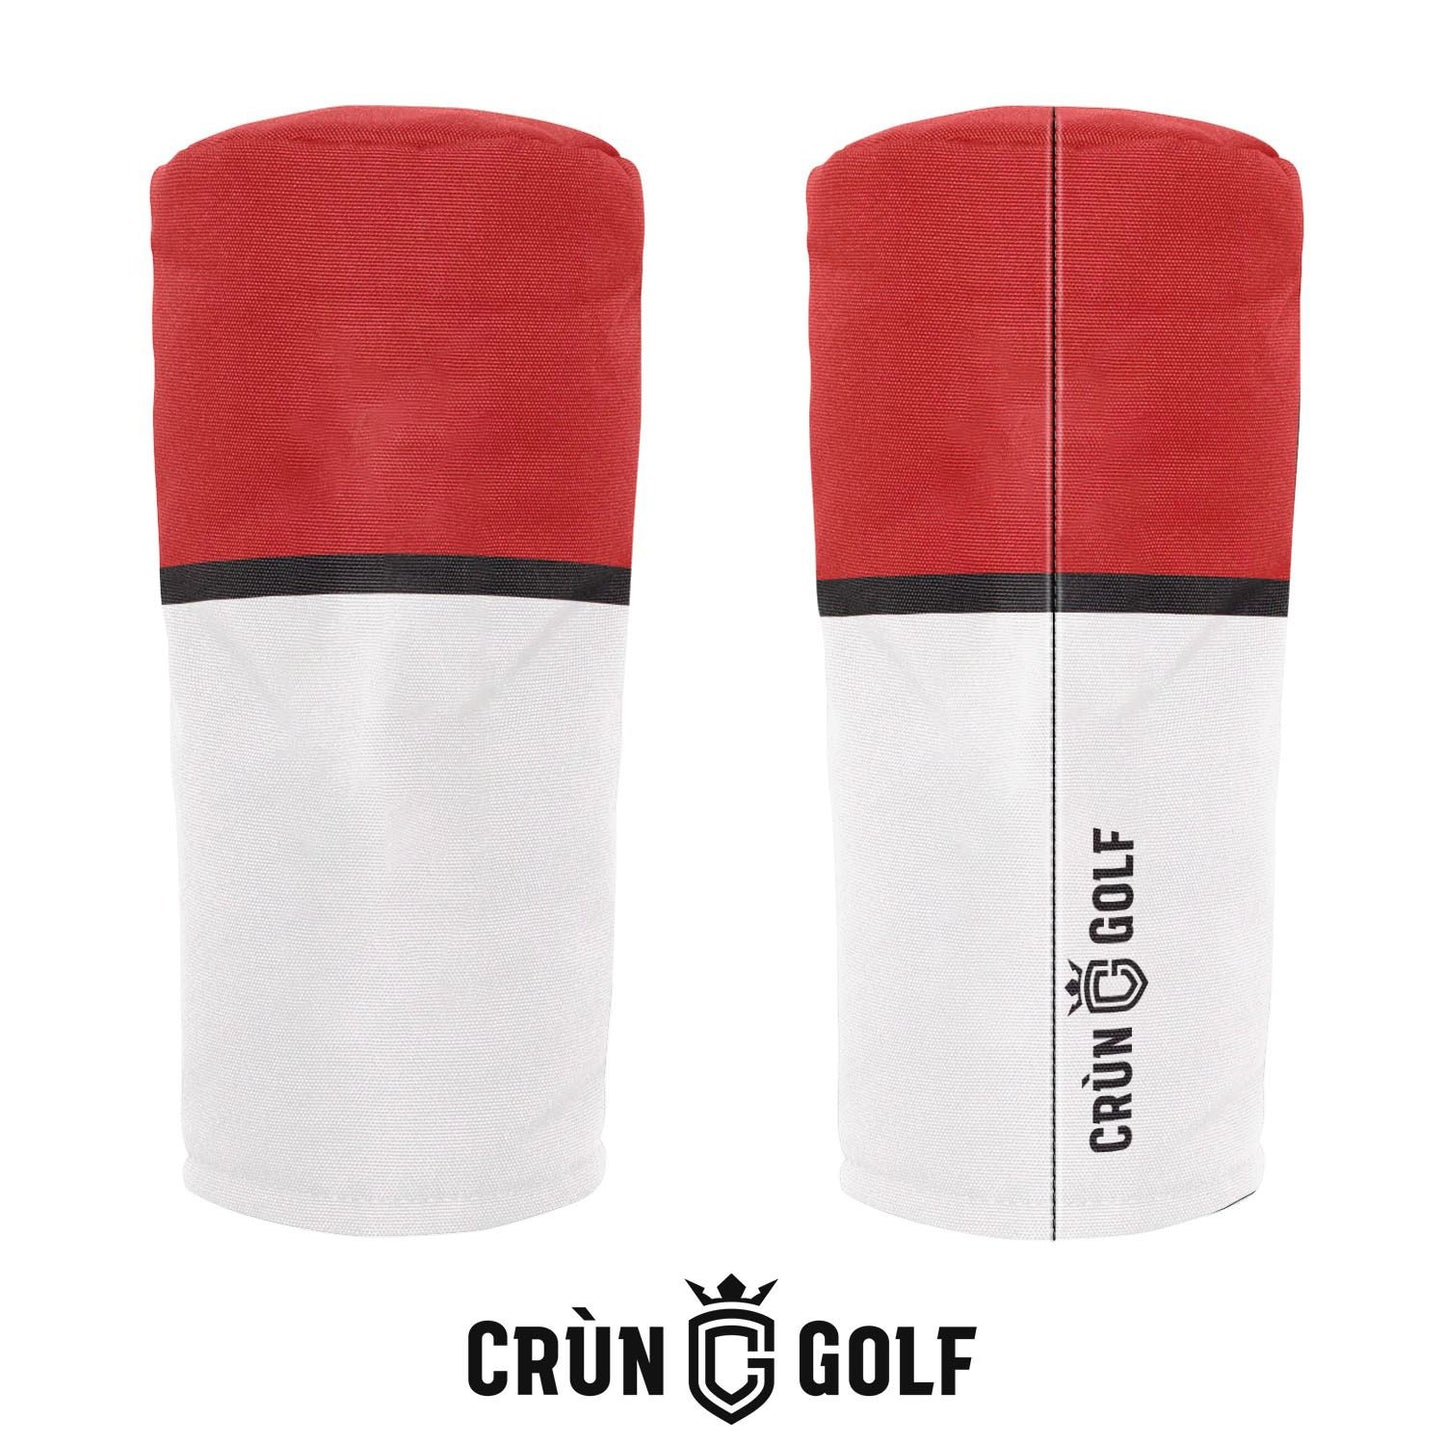 Bully Wee Headcover - 2020 Home